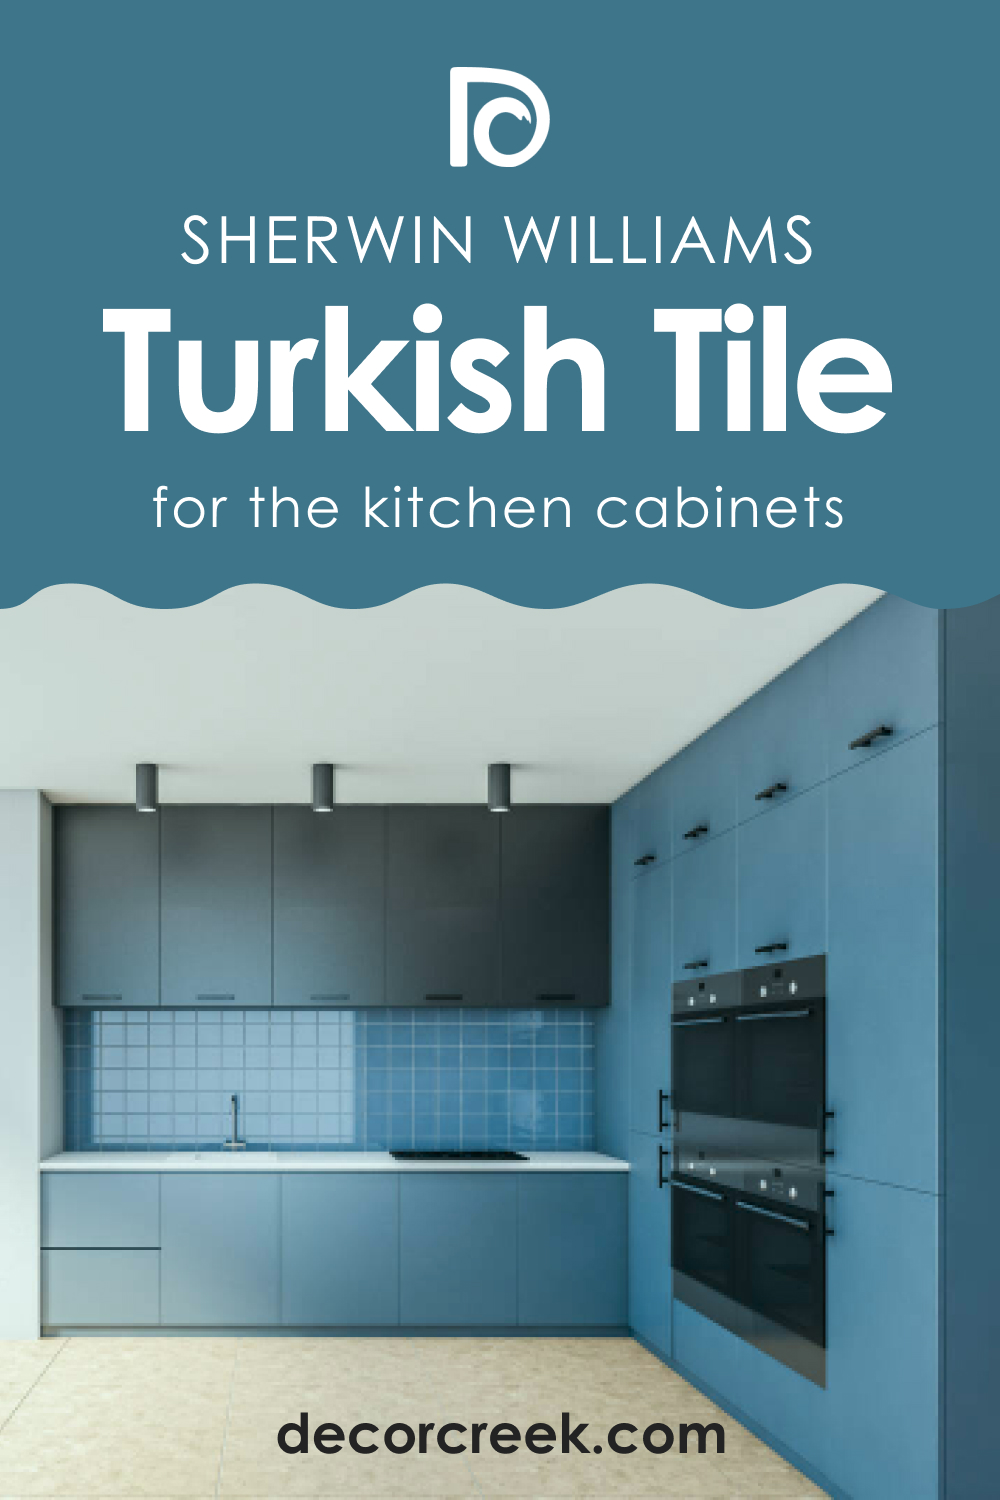 How to Use SW 7610 Turkish Tile for the Kitchen Cabinets?